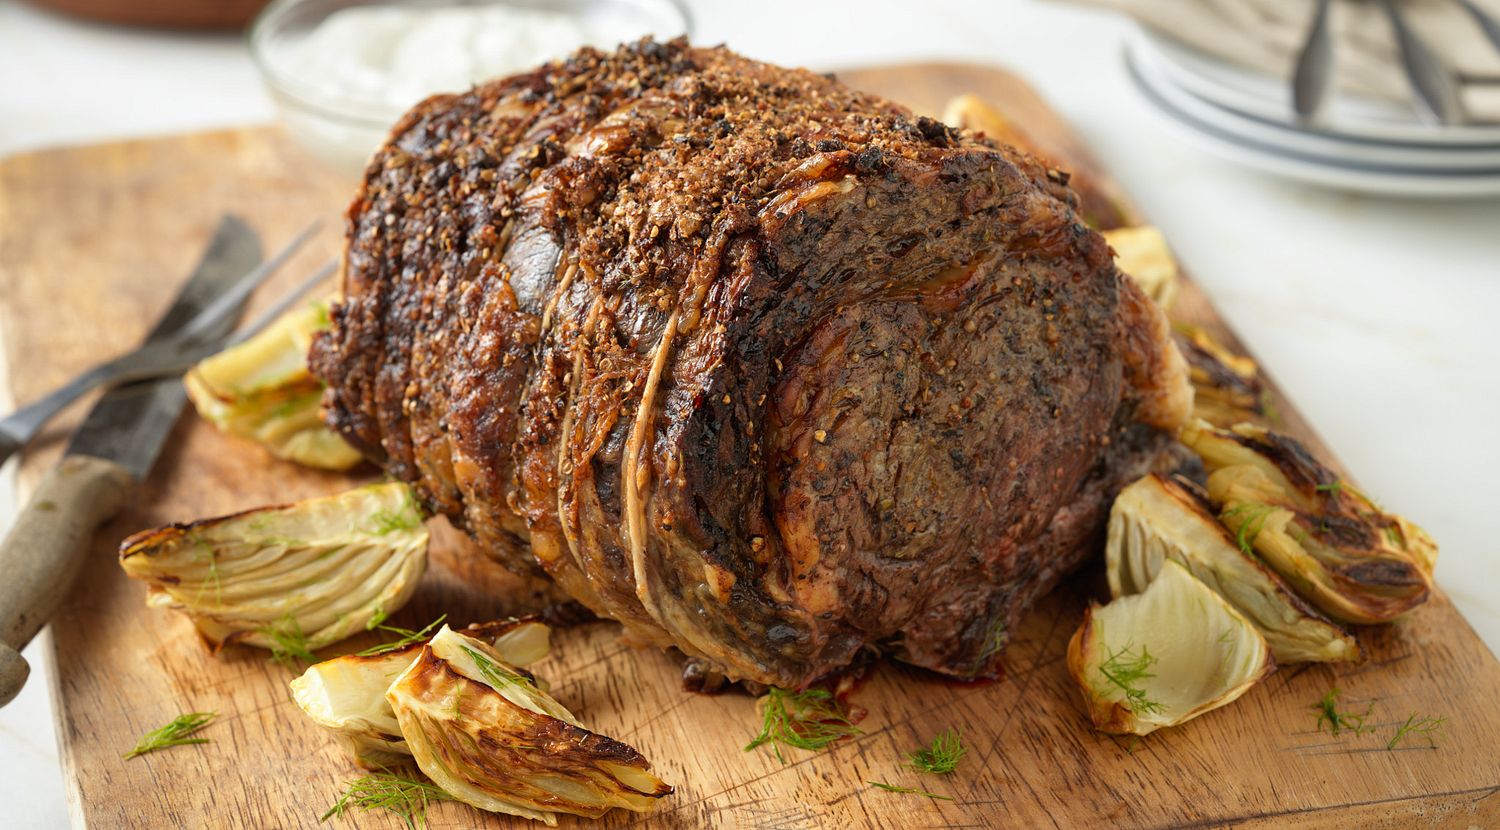 Herb-Crusted Beef Rib Roast with Roasted Fennel and Horseradish Cream Sauce